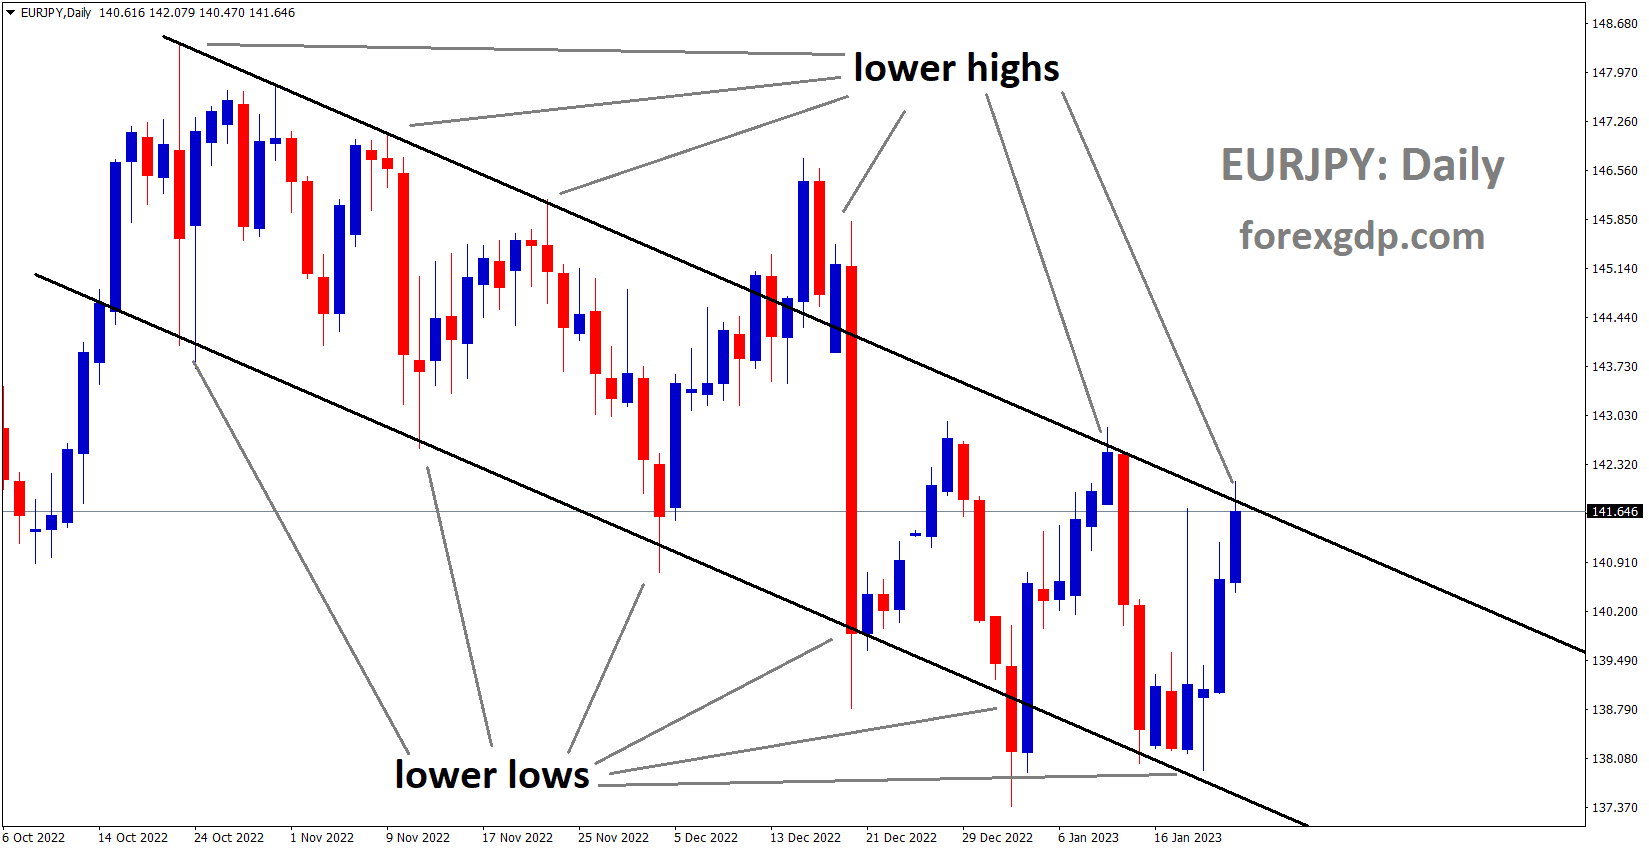 EURJPY is moving in the descending channel and the market has reached the lower high area of the channel 2